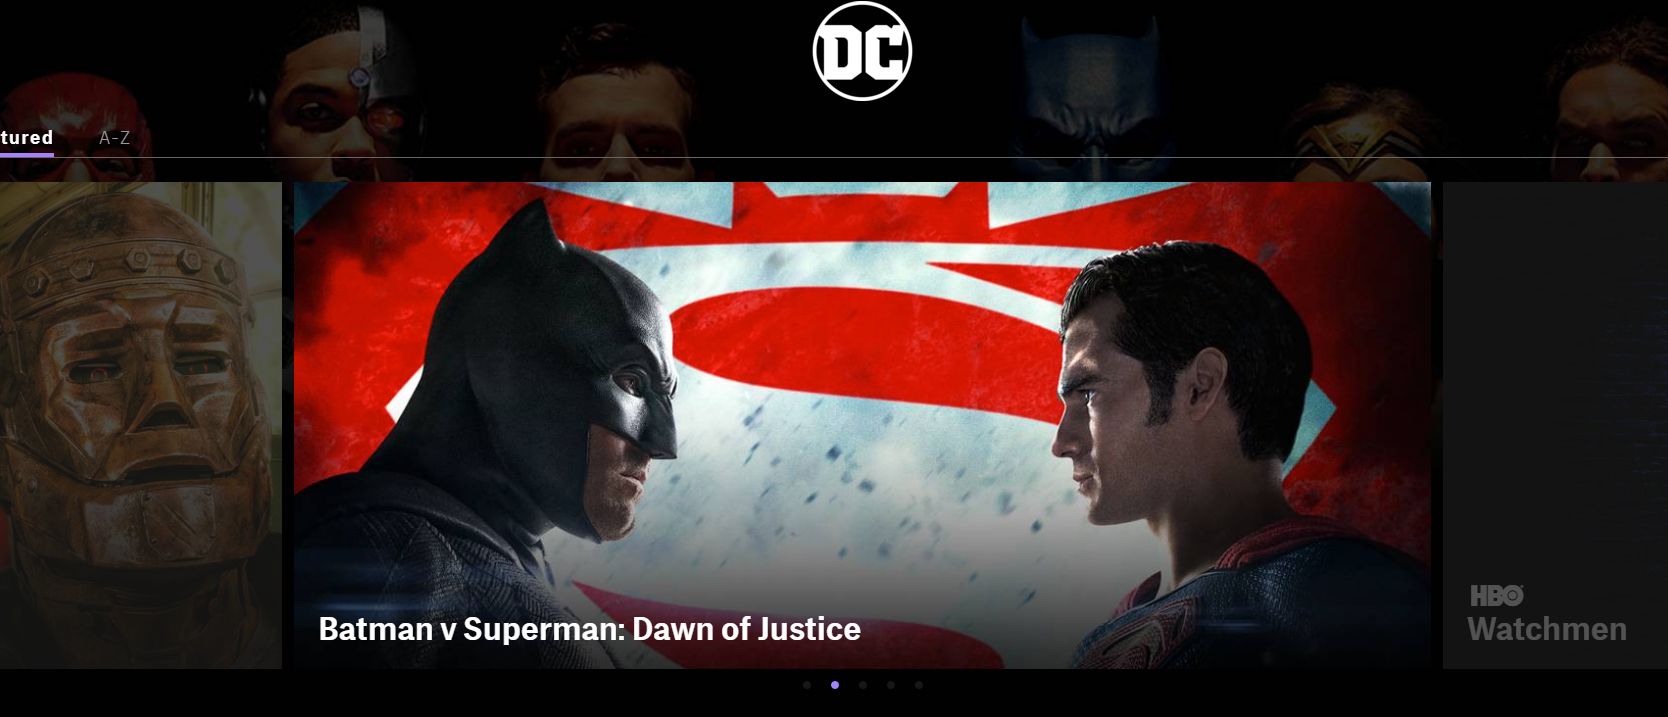 The Best Dc Movies And Shows On Hbo Max Android Authority